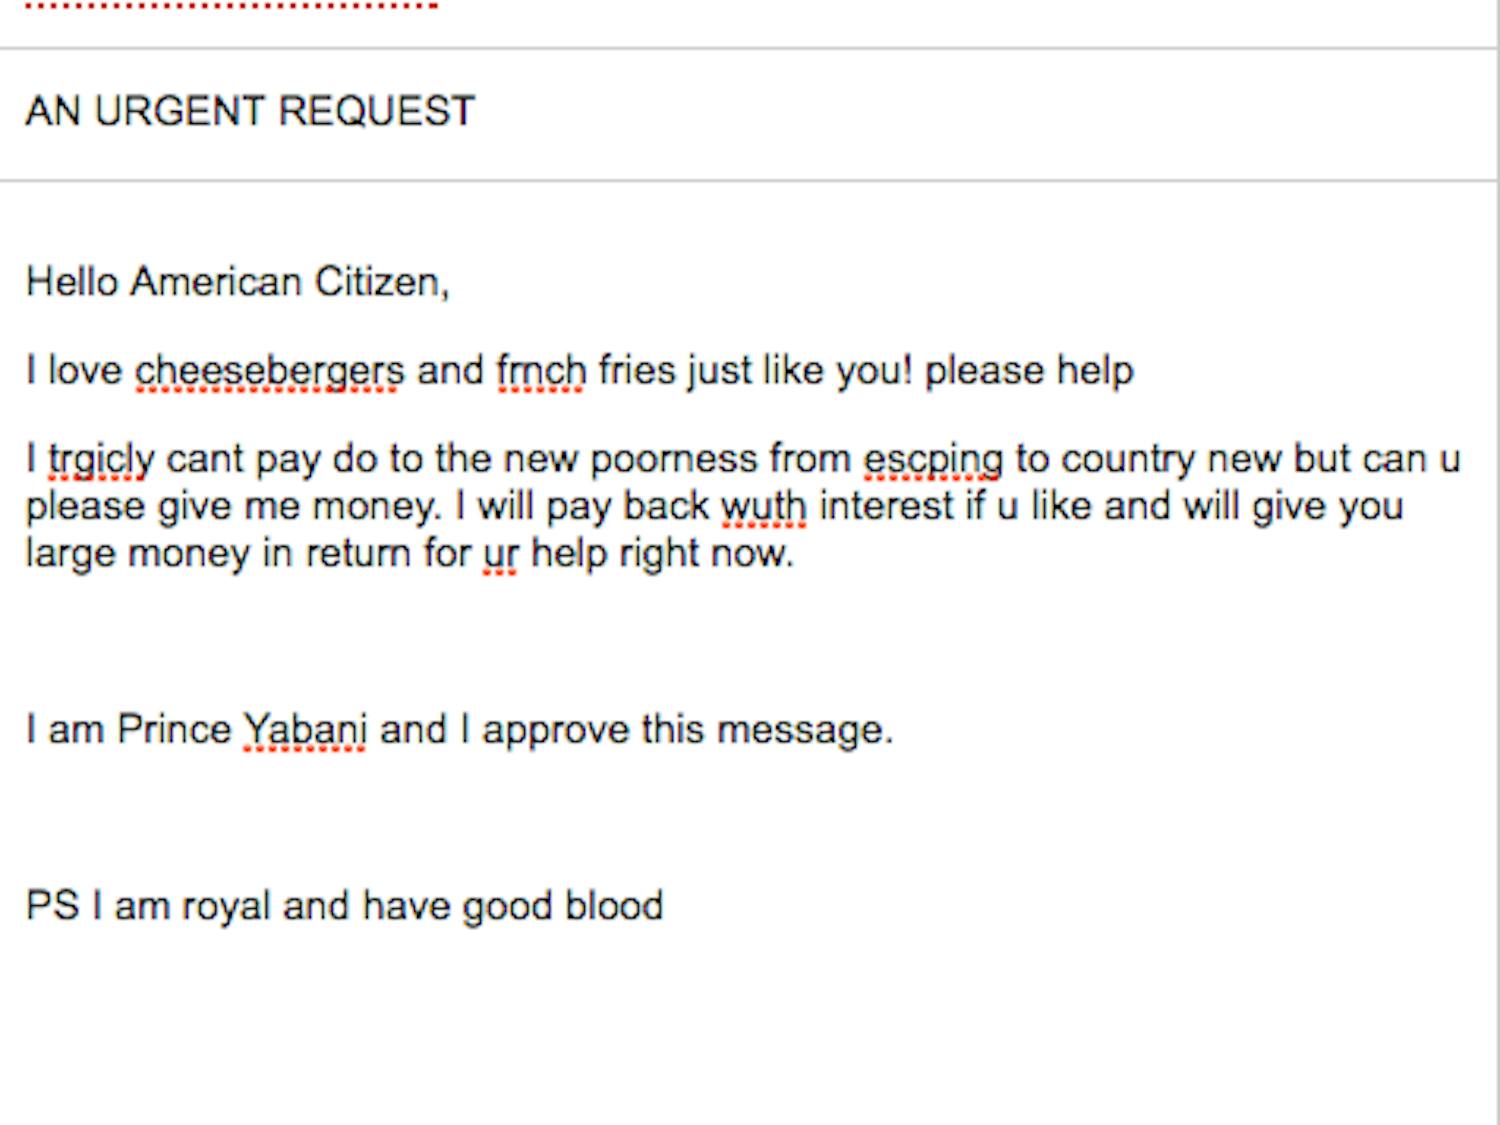 This poorly written email, sent by Prince Yabani, did not garner the response he had anticipated from the American people.